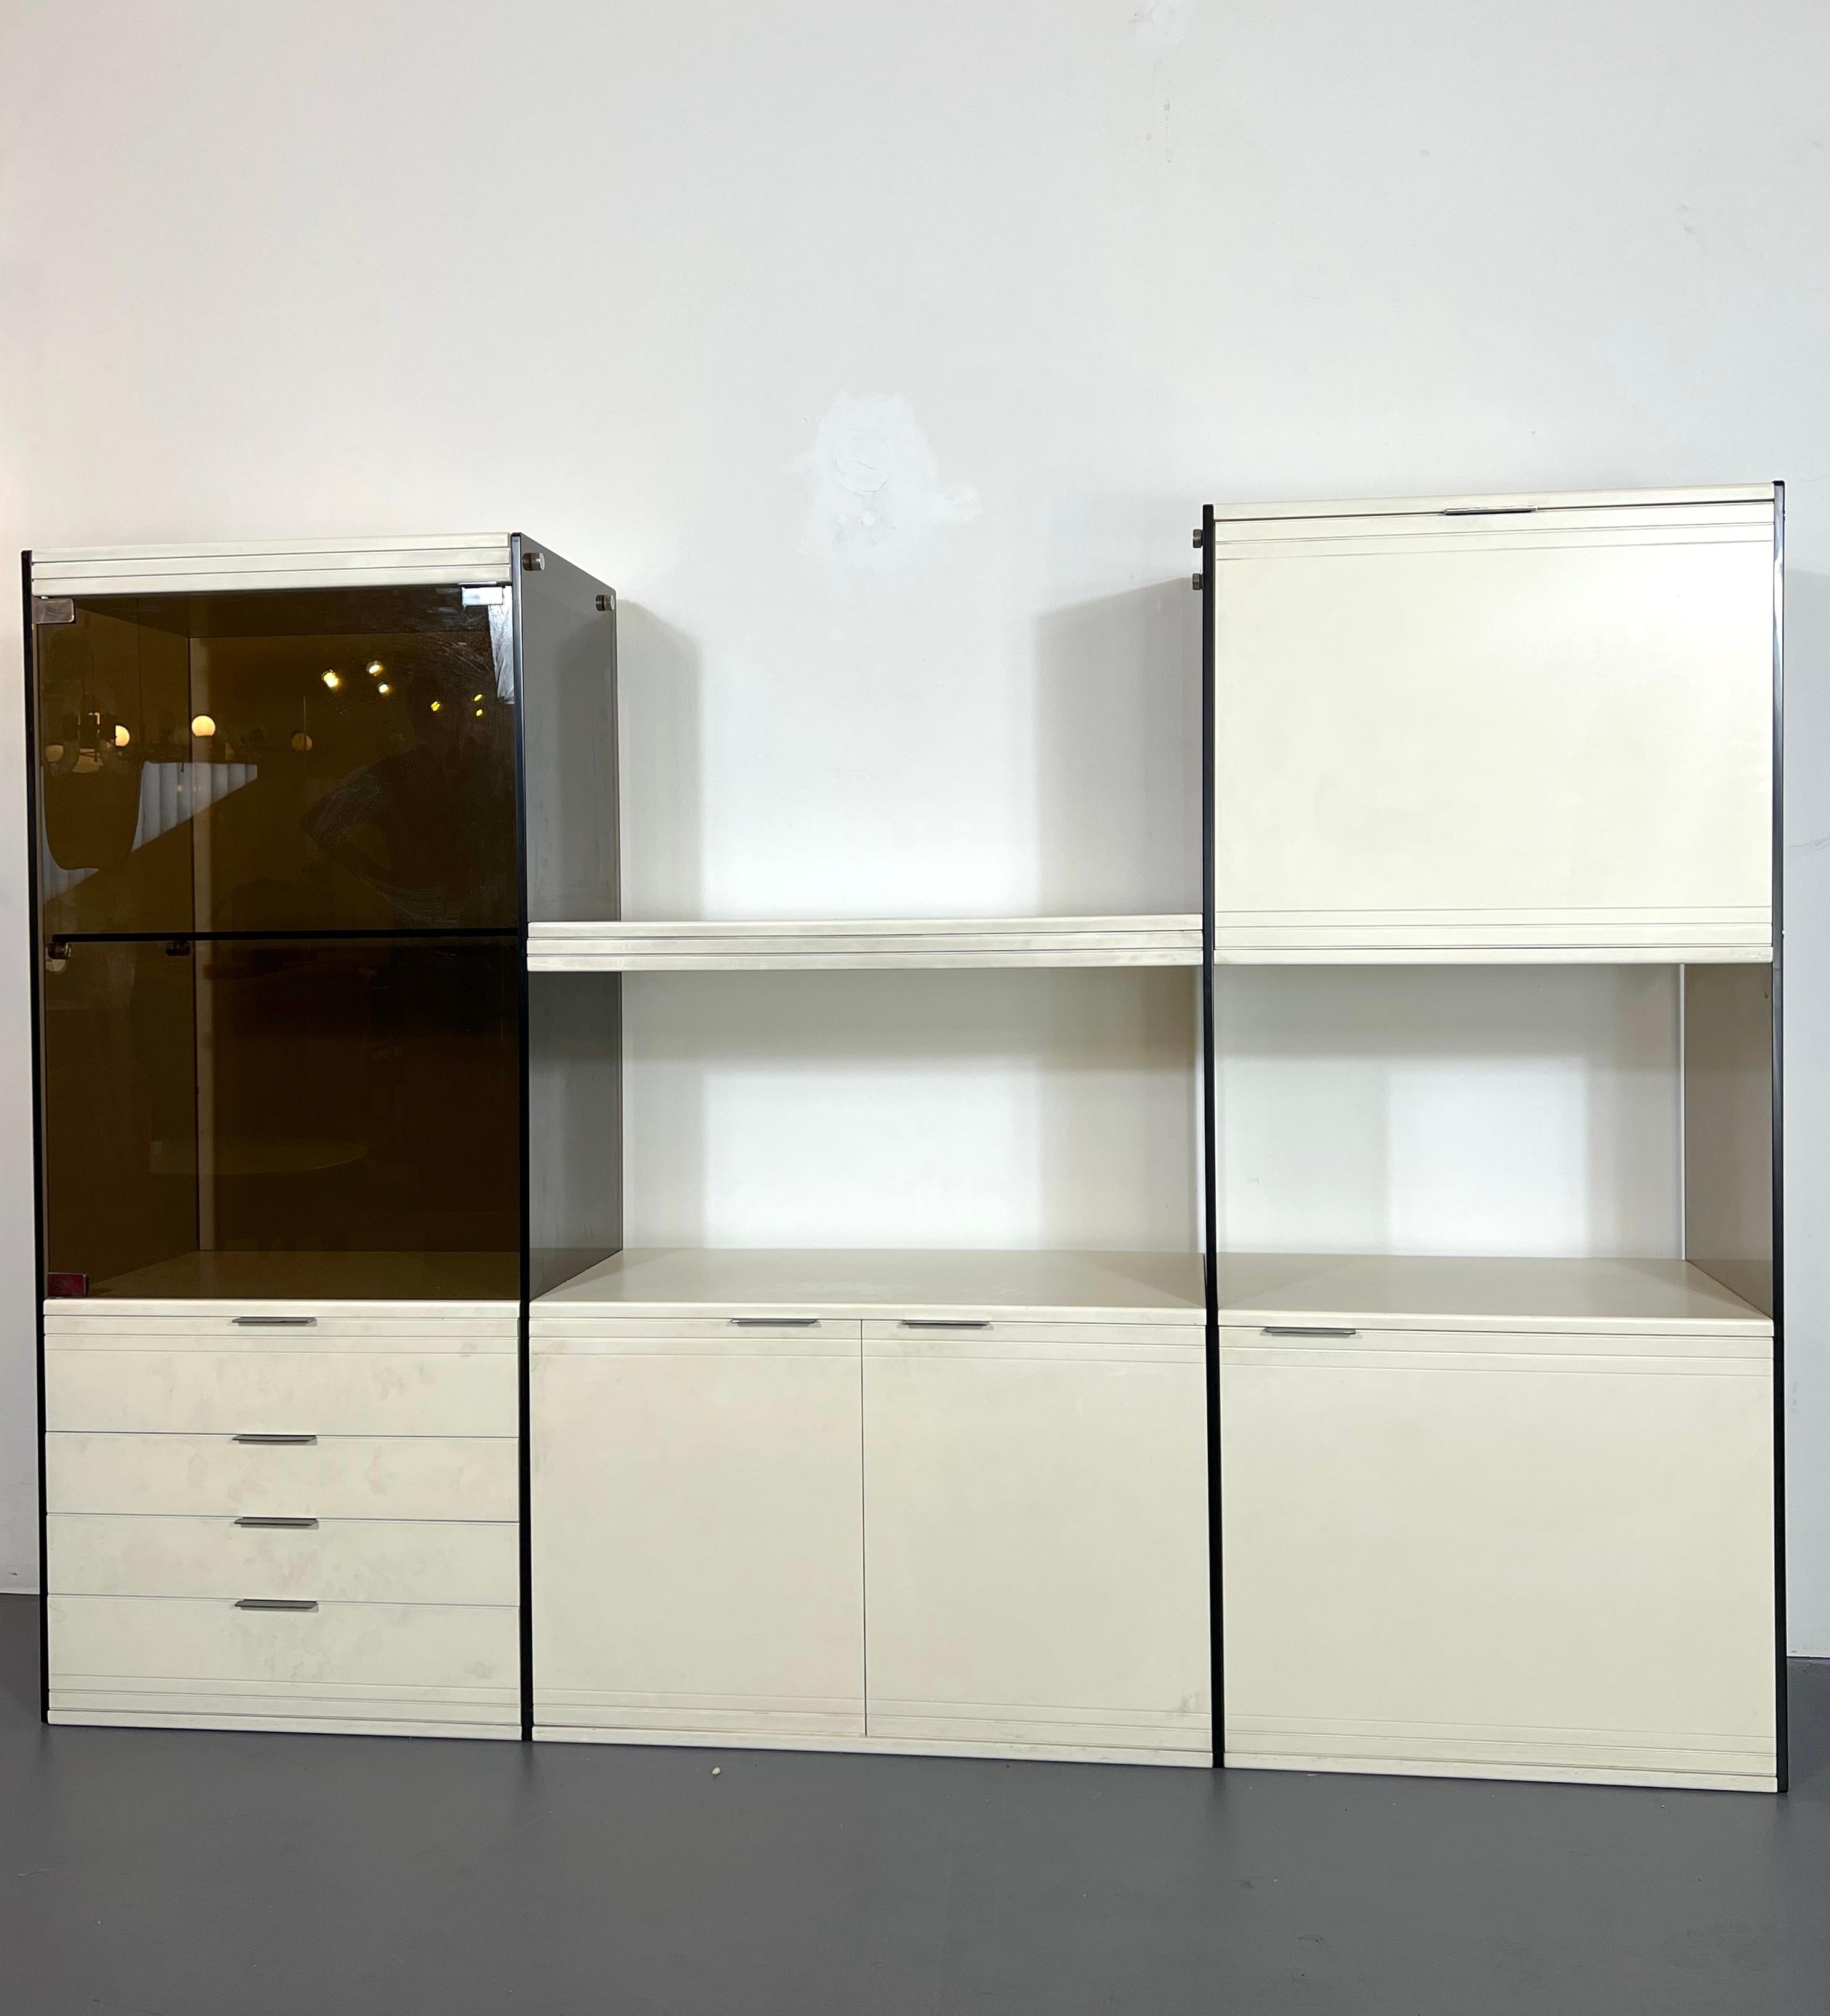 Great vintage condition with normal trace of age snd use for this cabinet made from smoked glasses and lacquered wood.